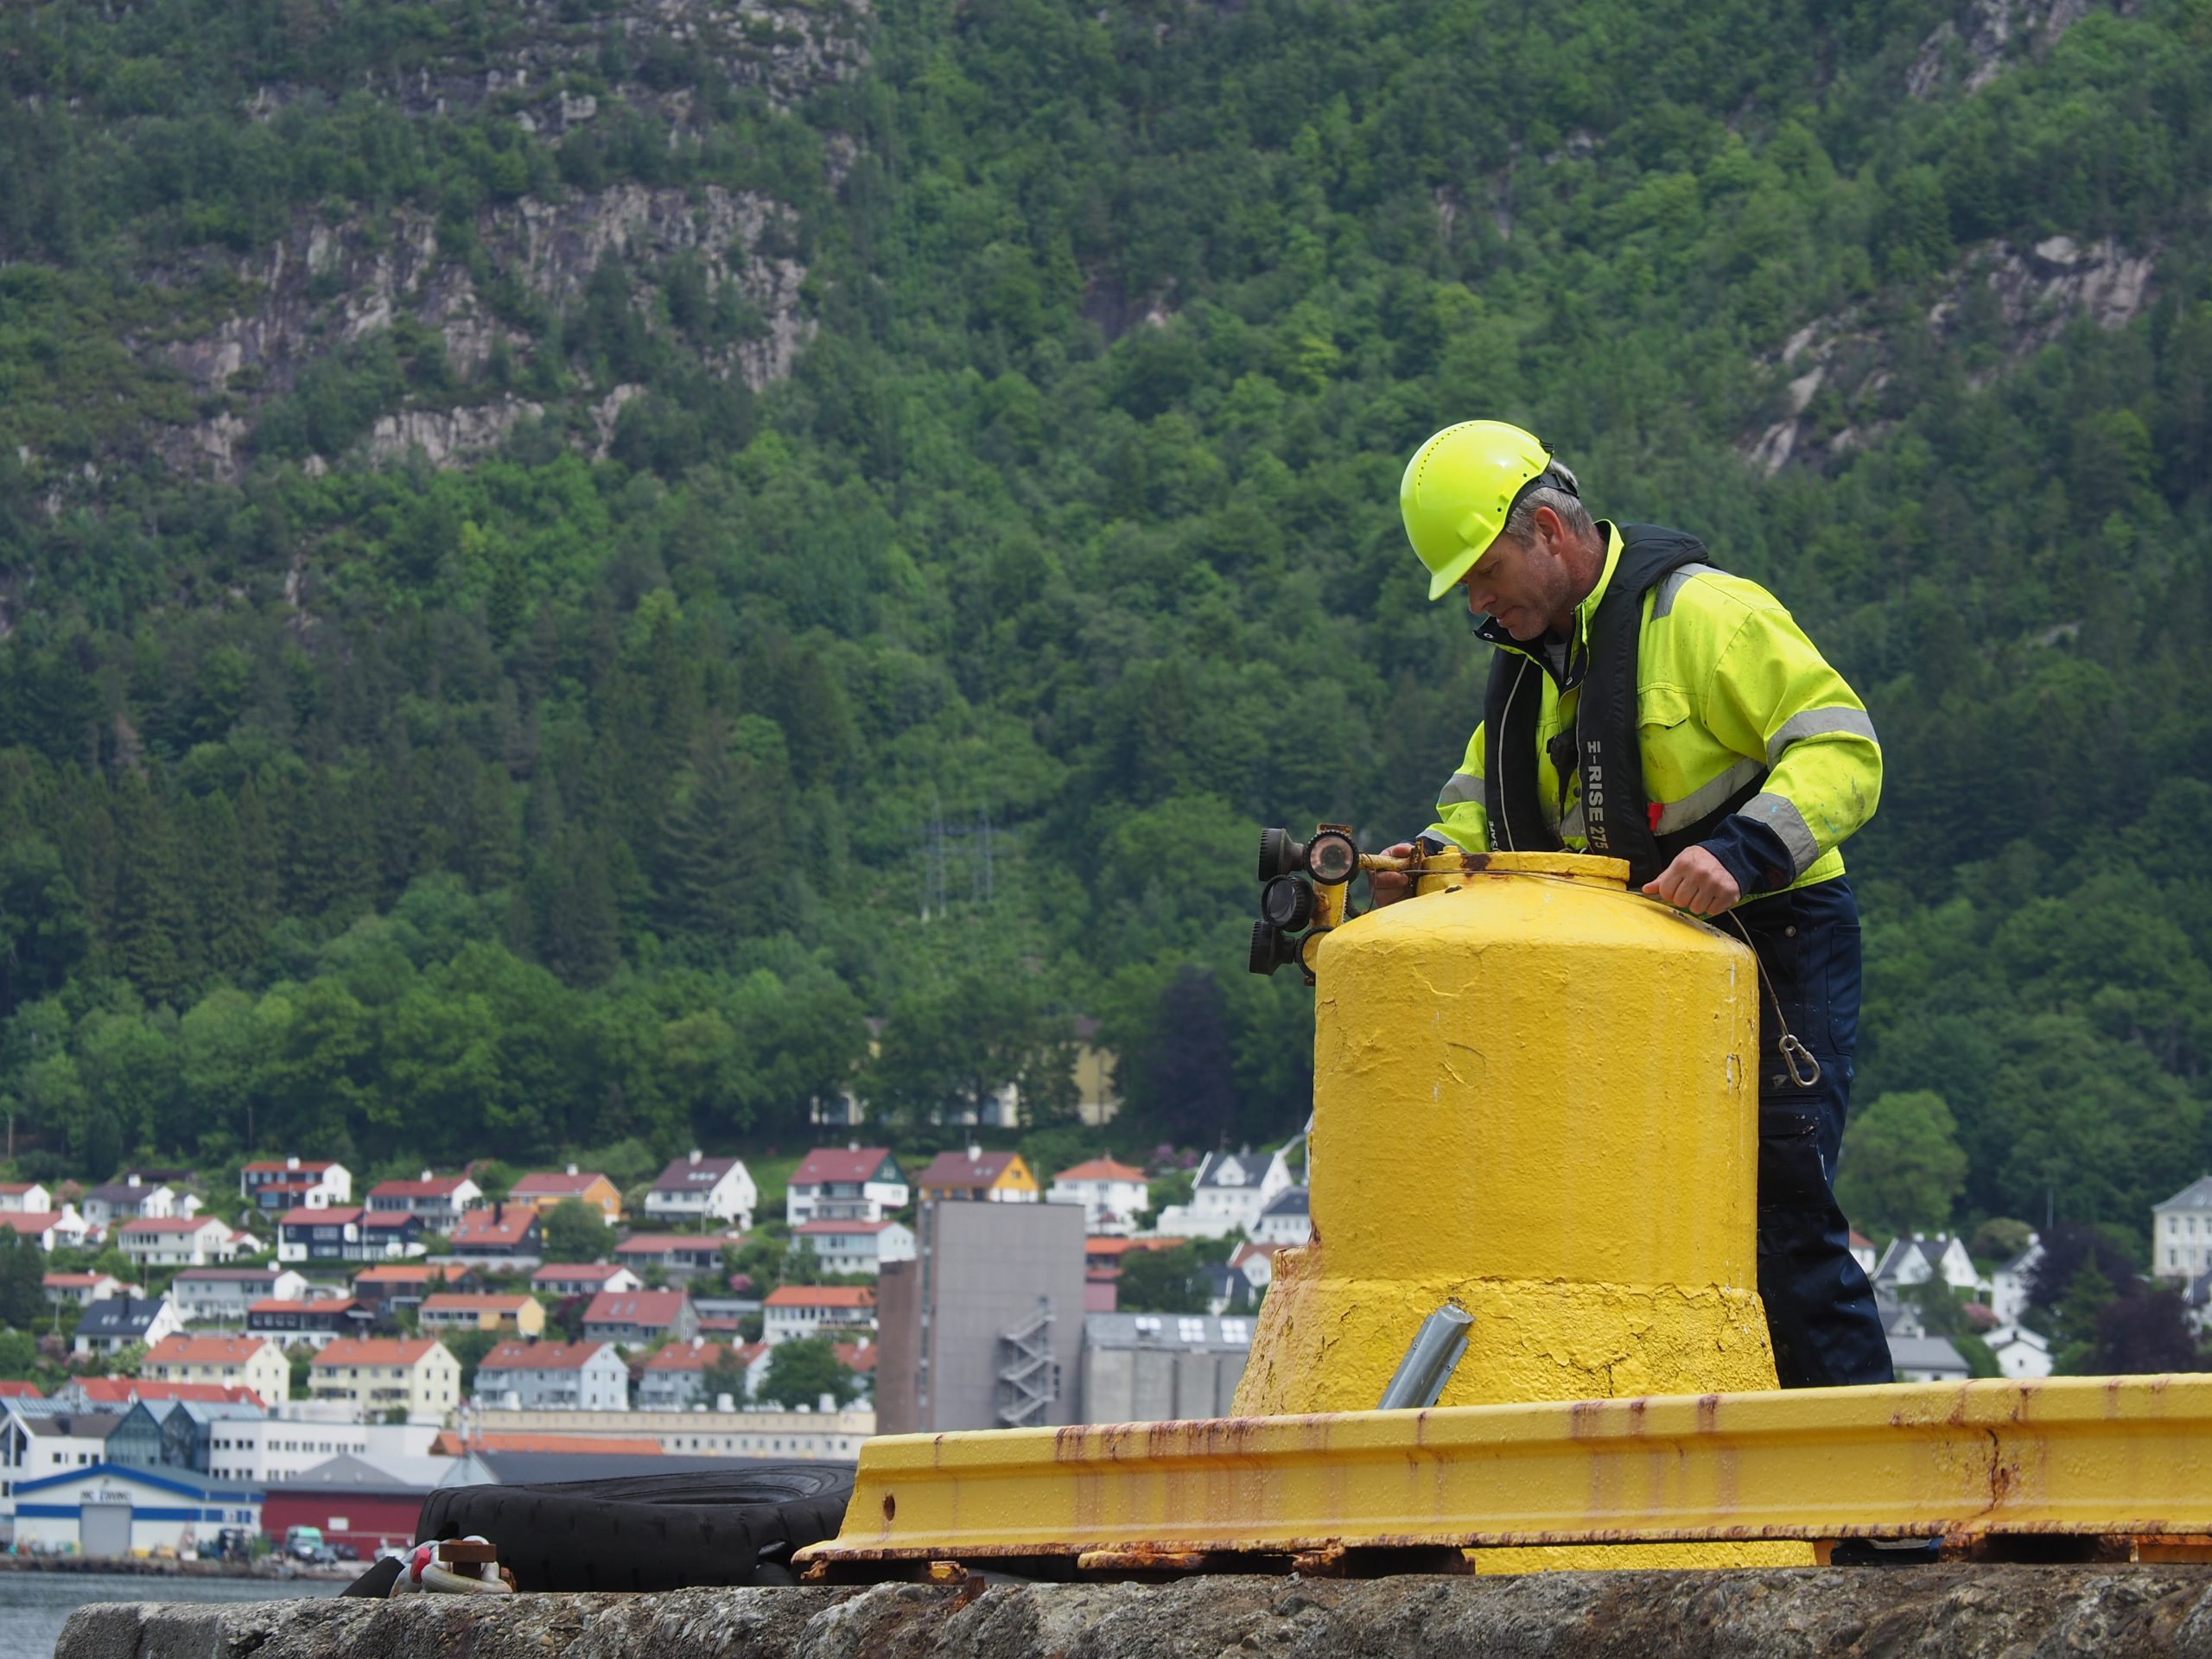 An AB attaches the Transponder Reflector to a shore location for the RADius and SpotTrack check